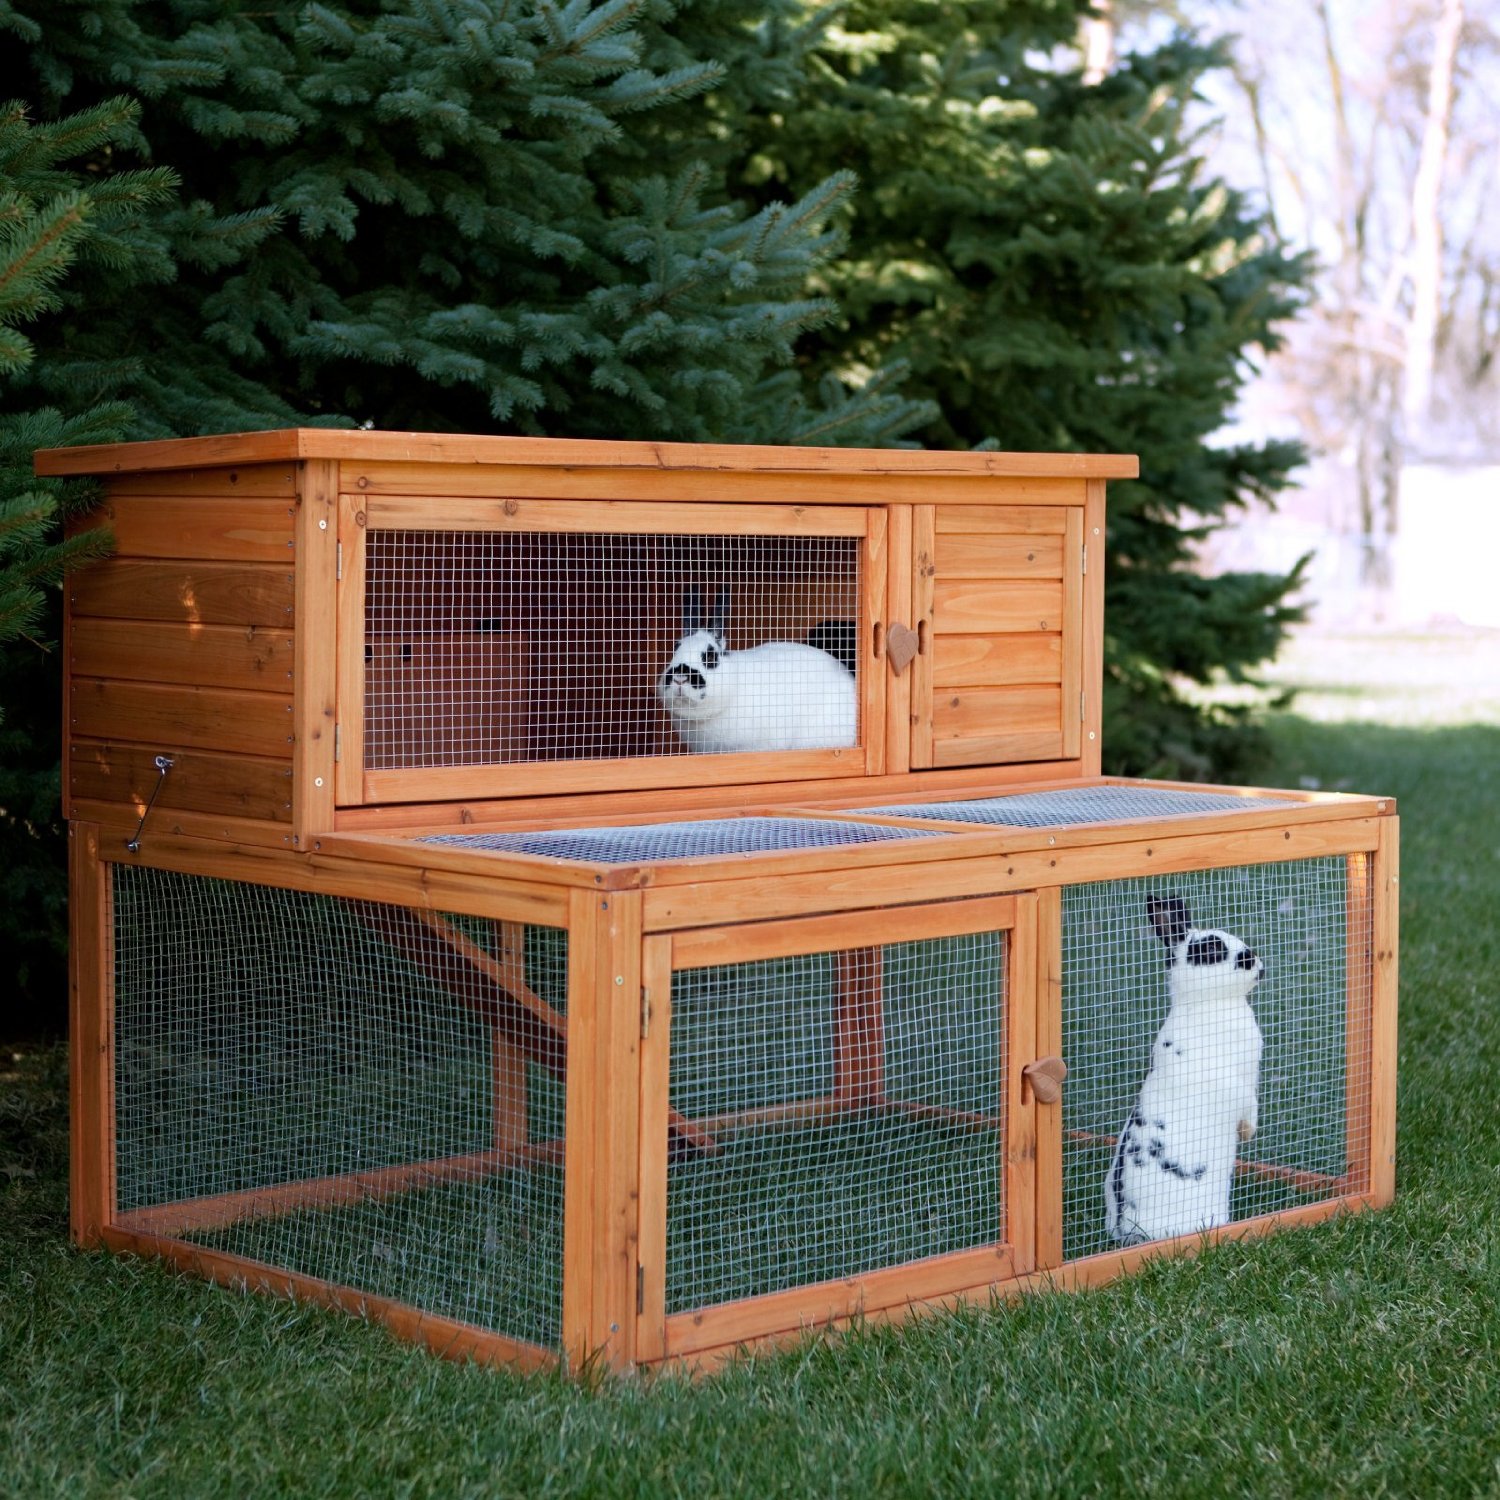 ... in the household and with the bunny comes the need for a rabbit hutch